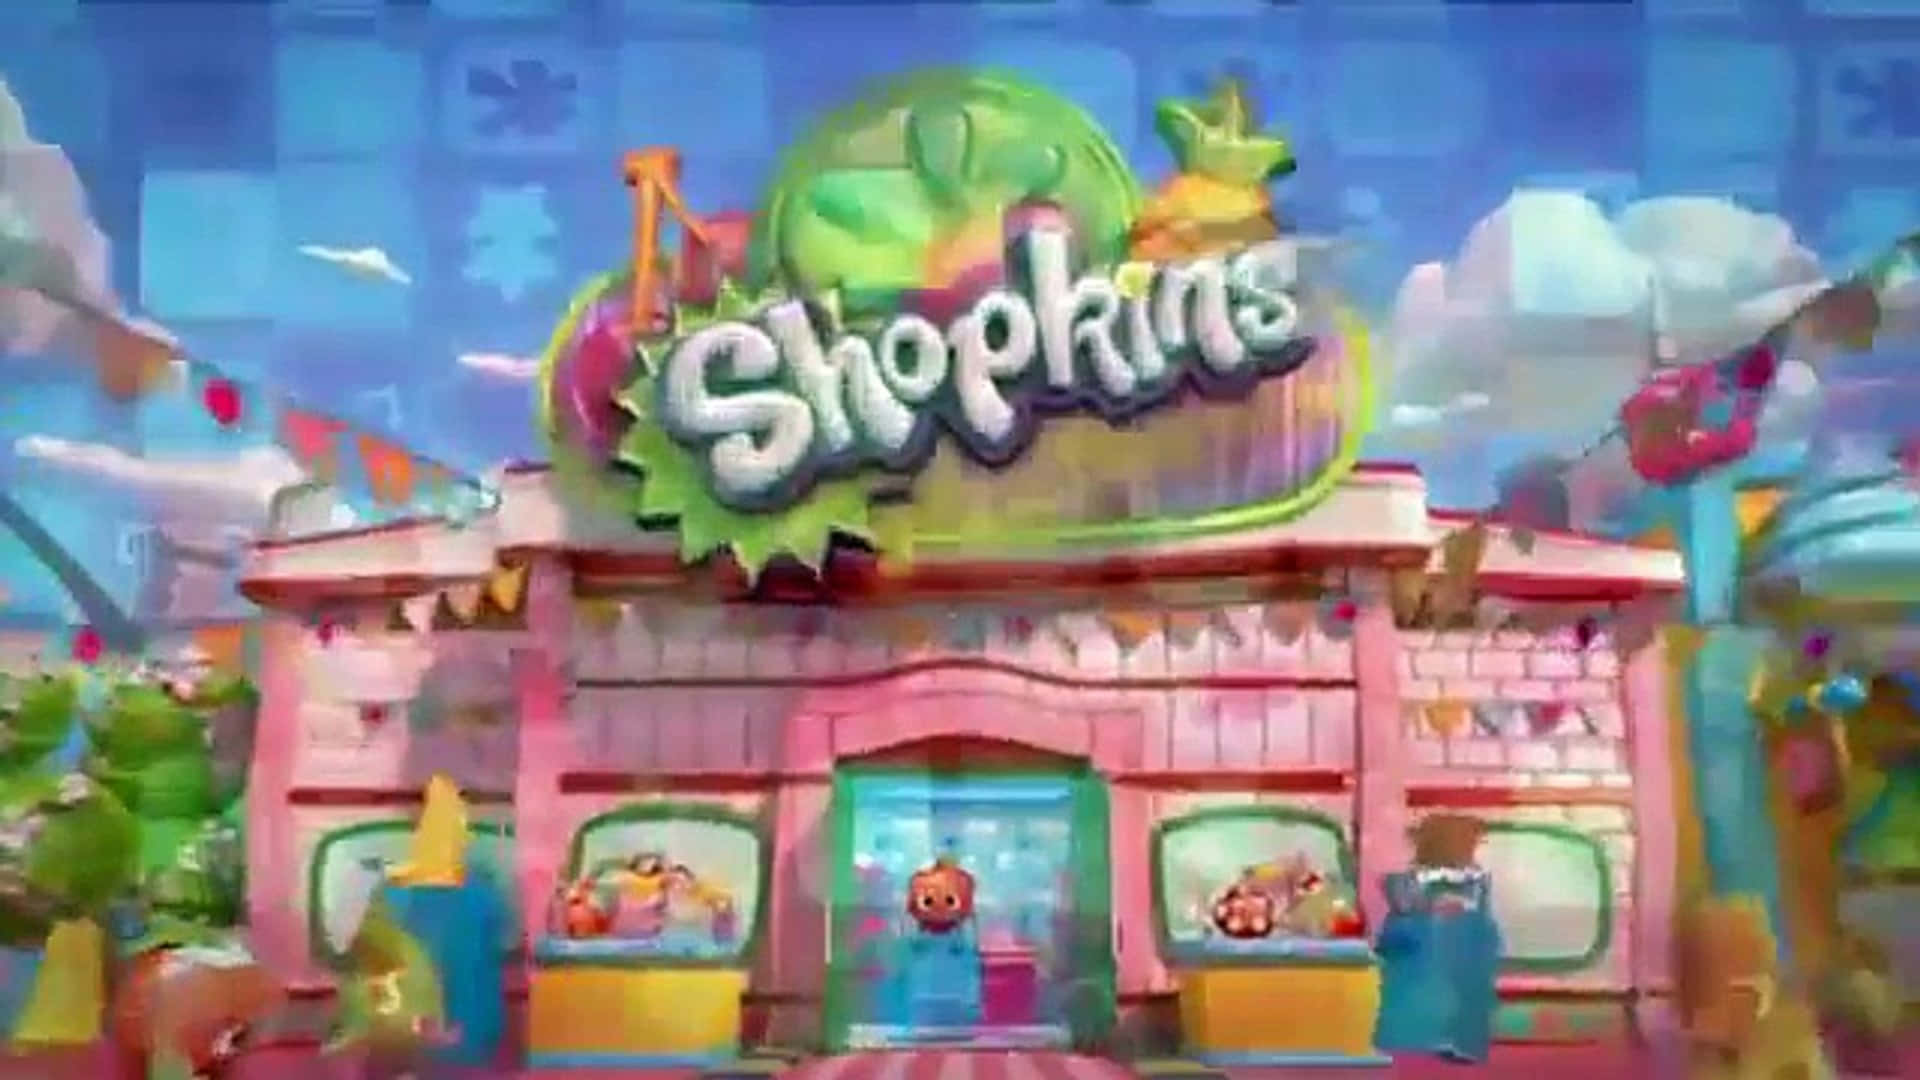 Get Ready To Join The Trend And Take Home Your Shopkins Today!